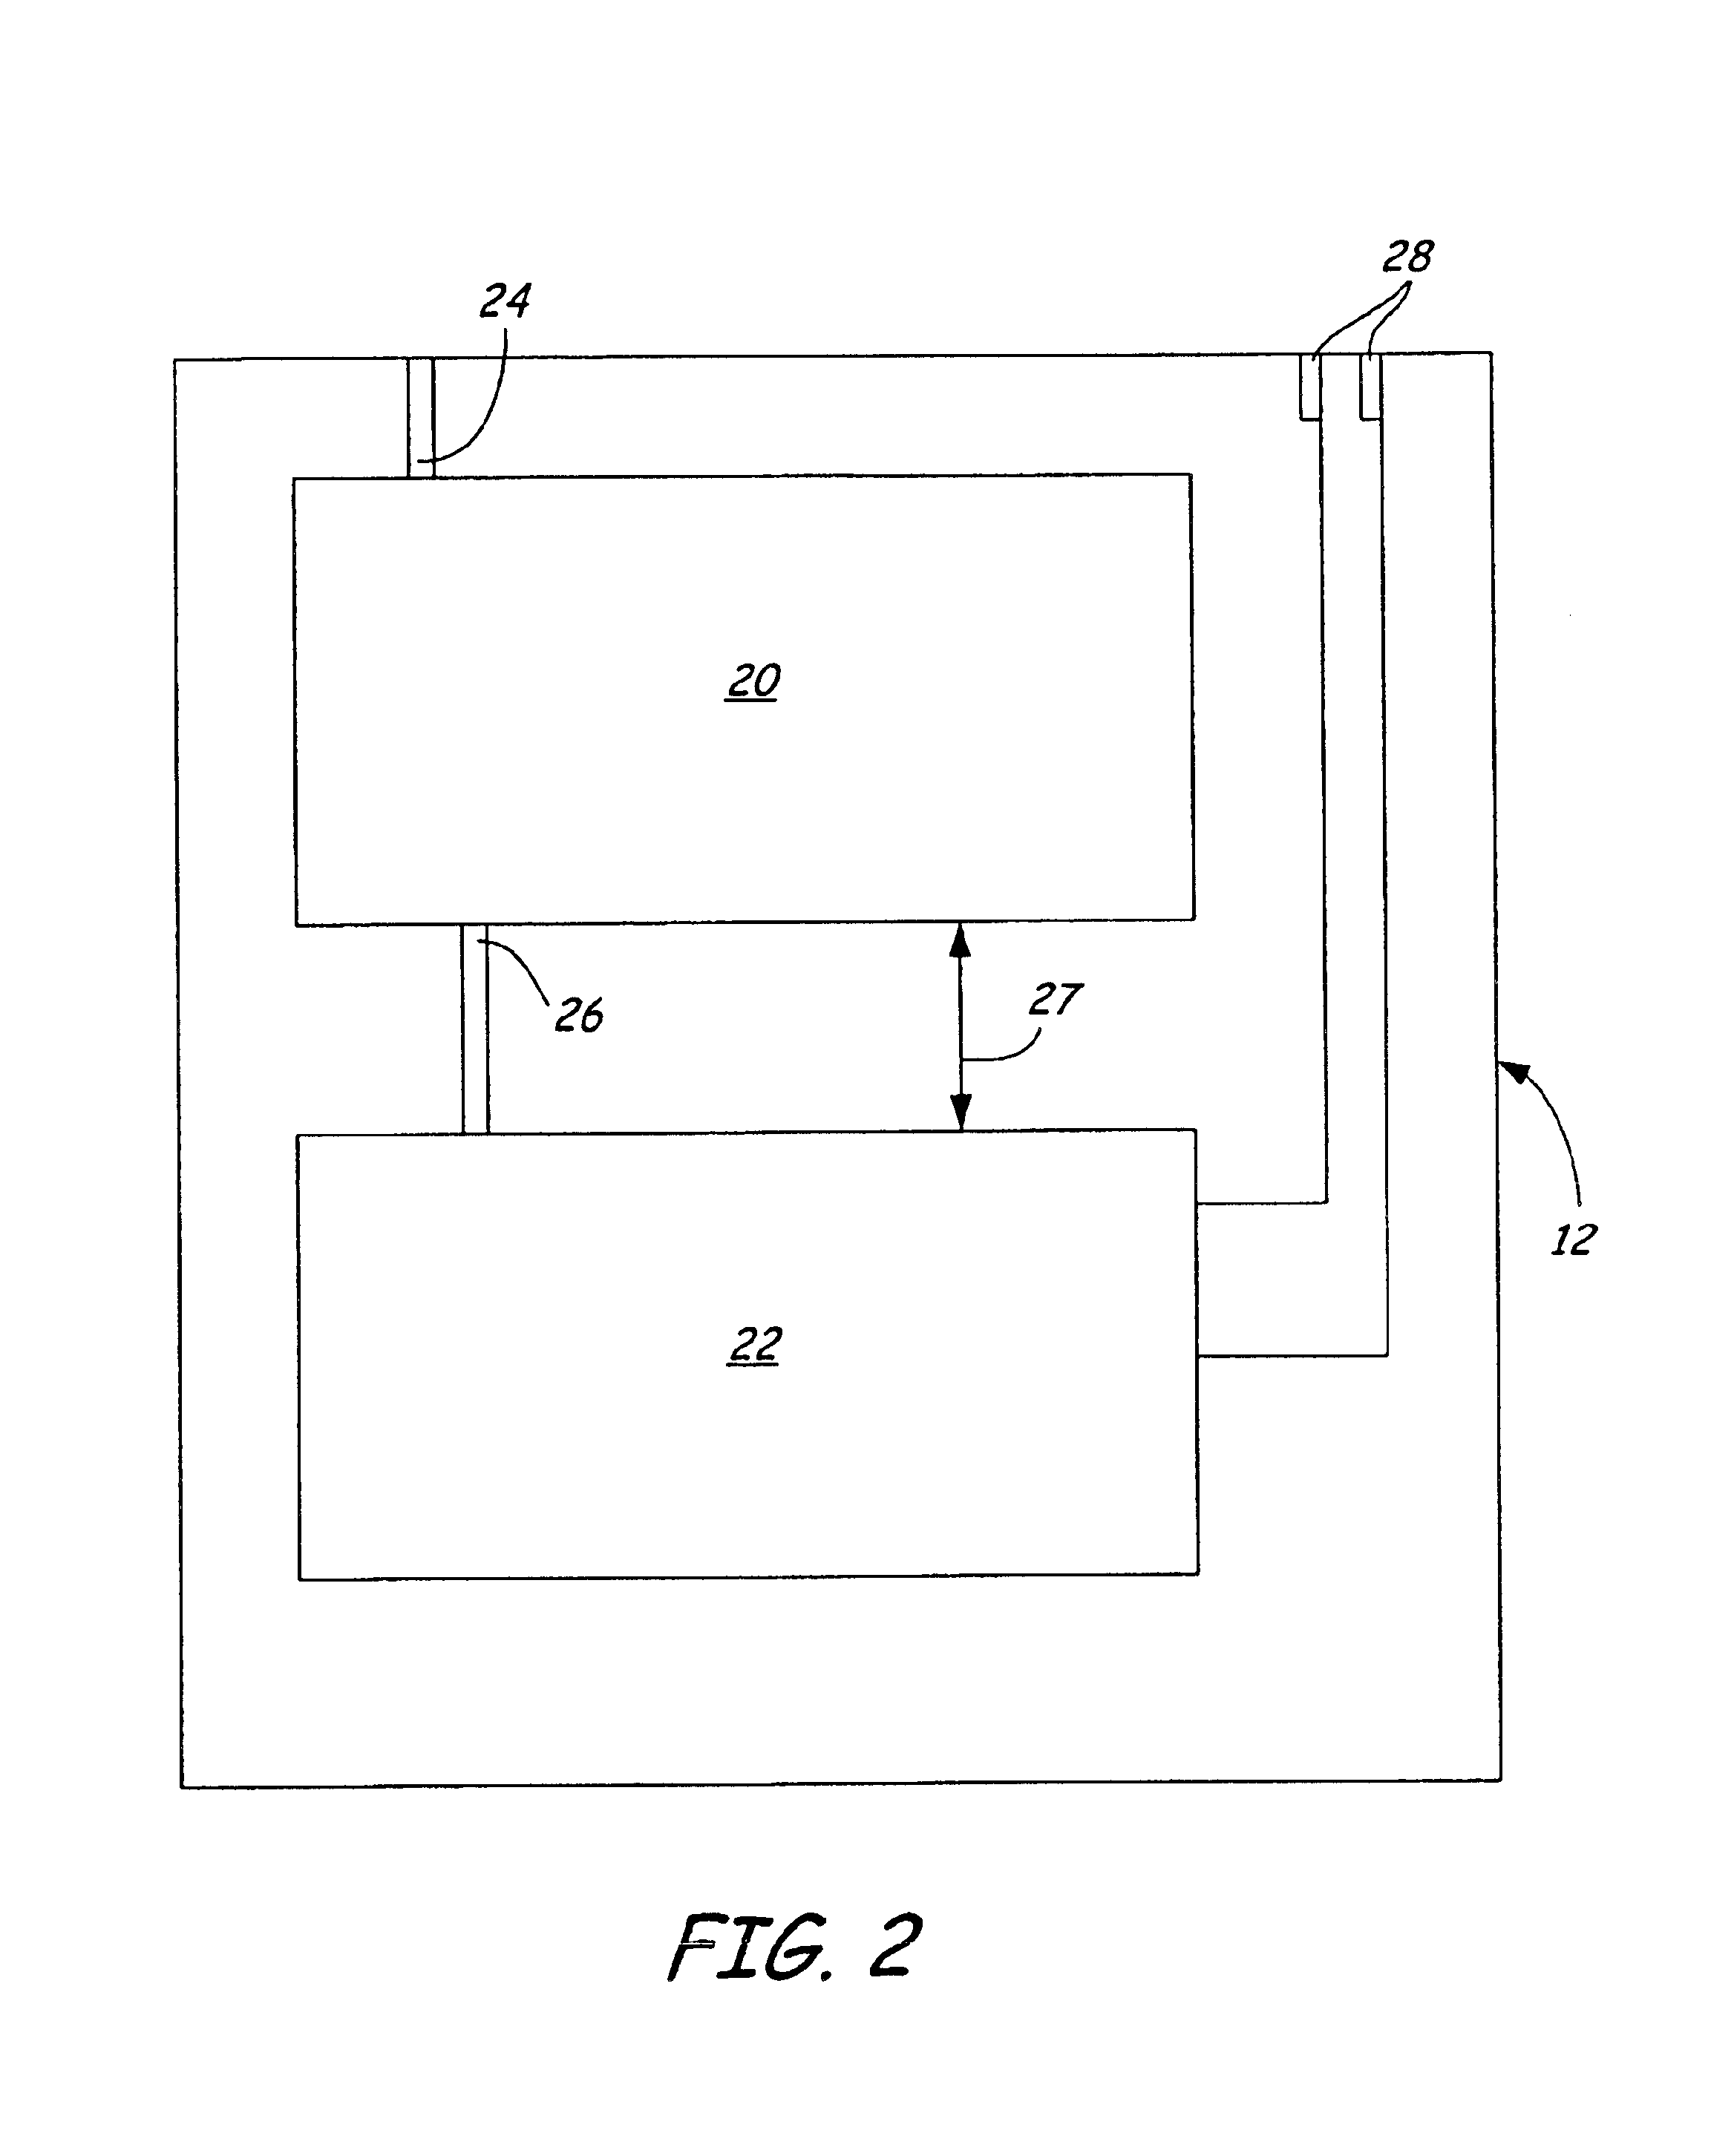 Process analytic system with improved sample handling system